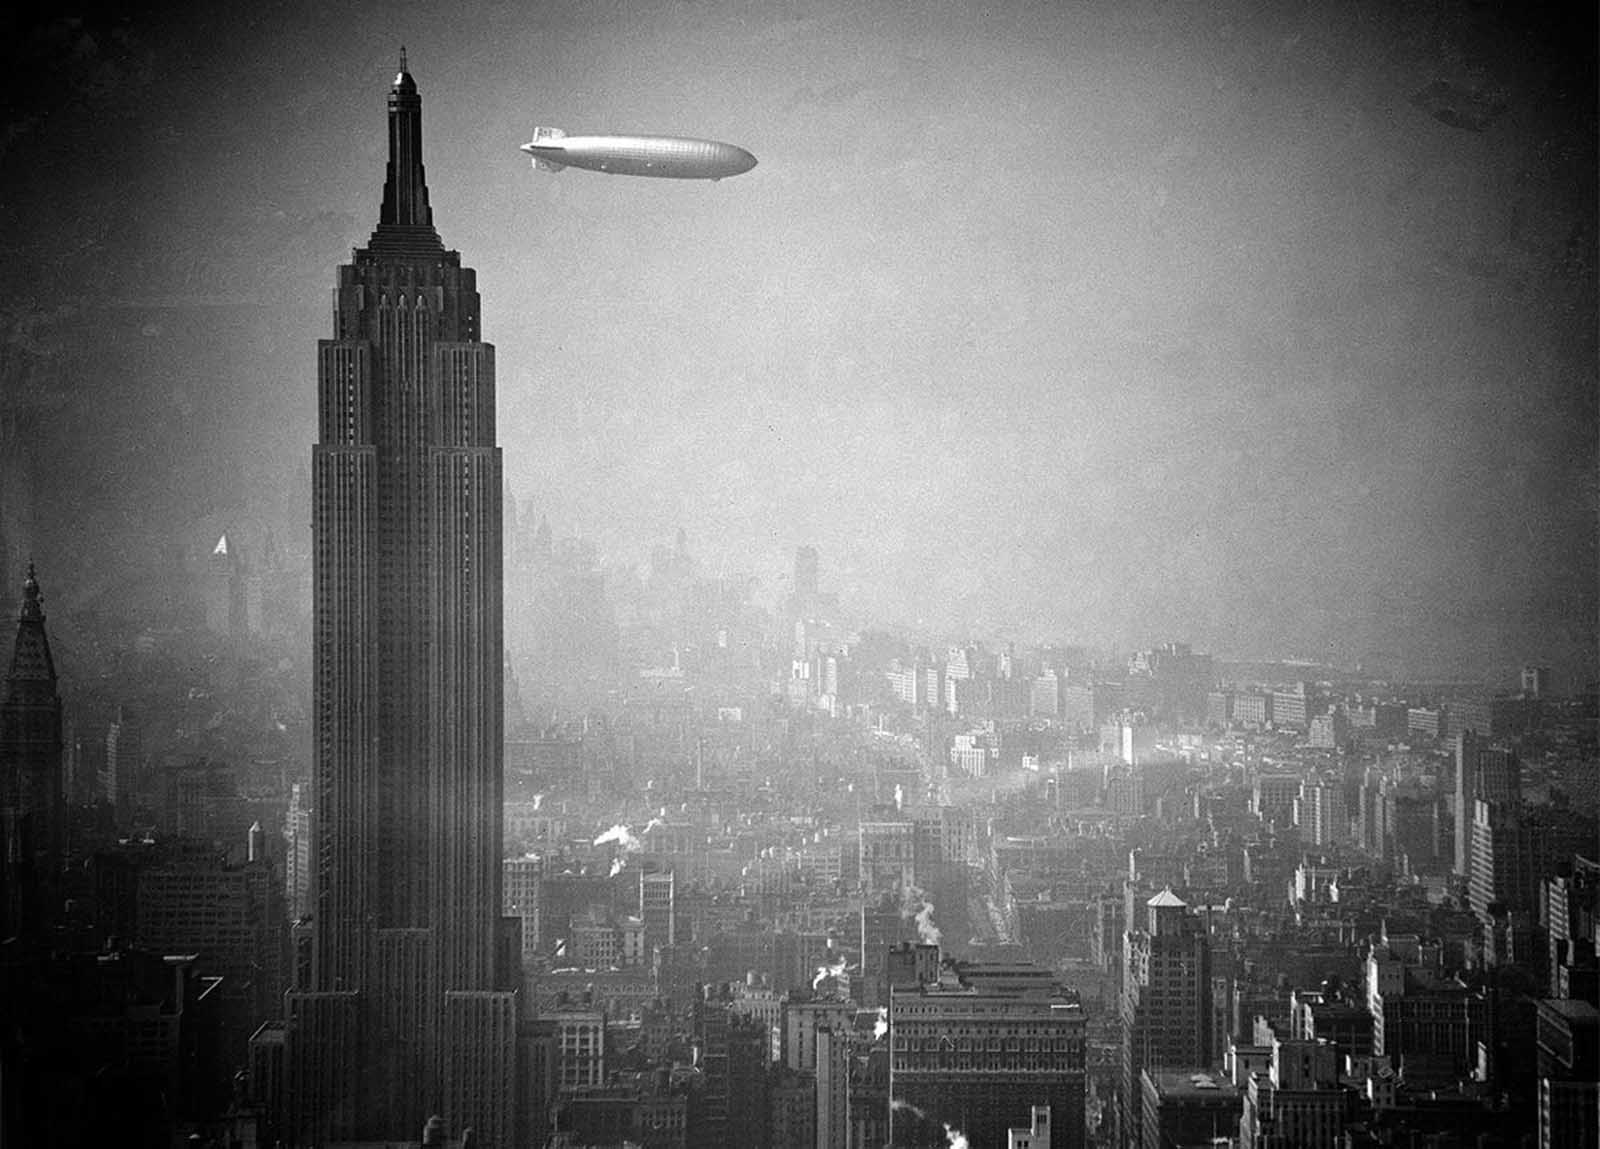 The German zeppelin Hindenburg floats past the Empire State Building over Manhattan, on August 8, 1936, en route to Lakehurst, New Jersey, from Germany.